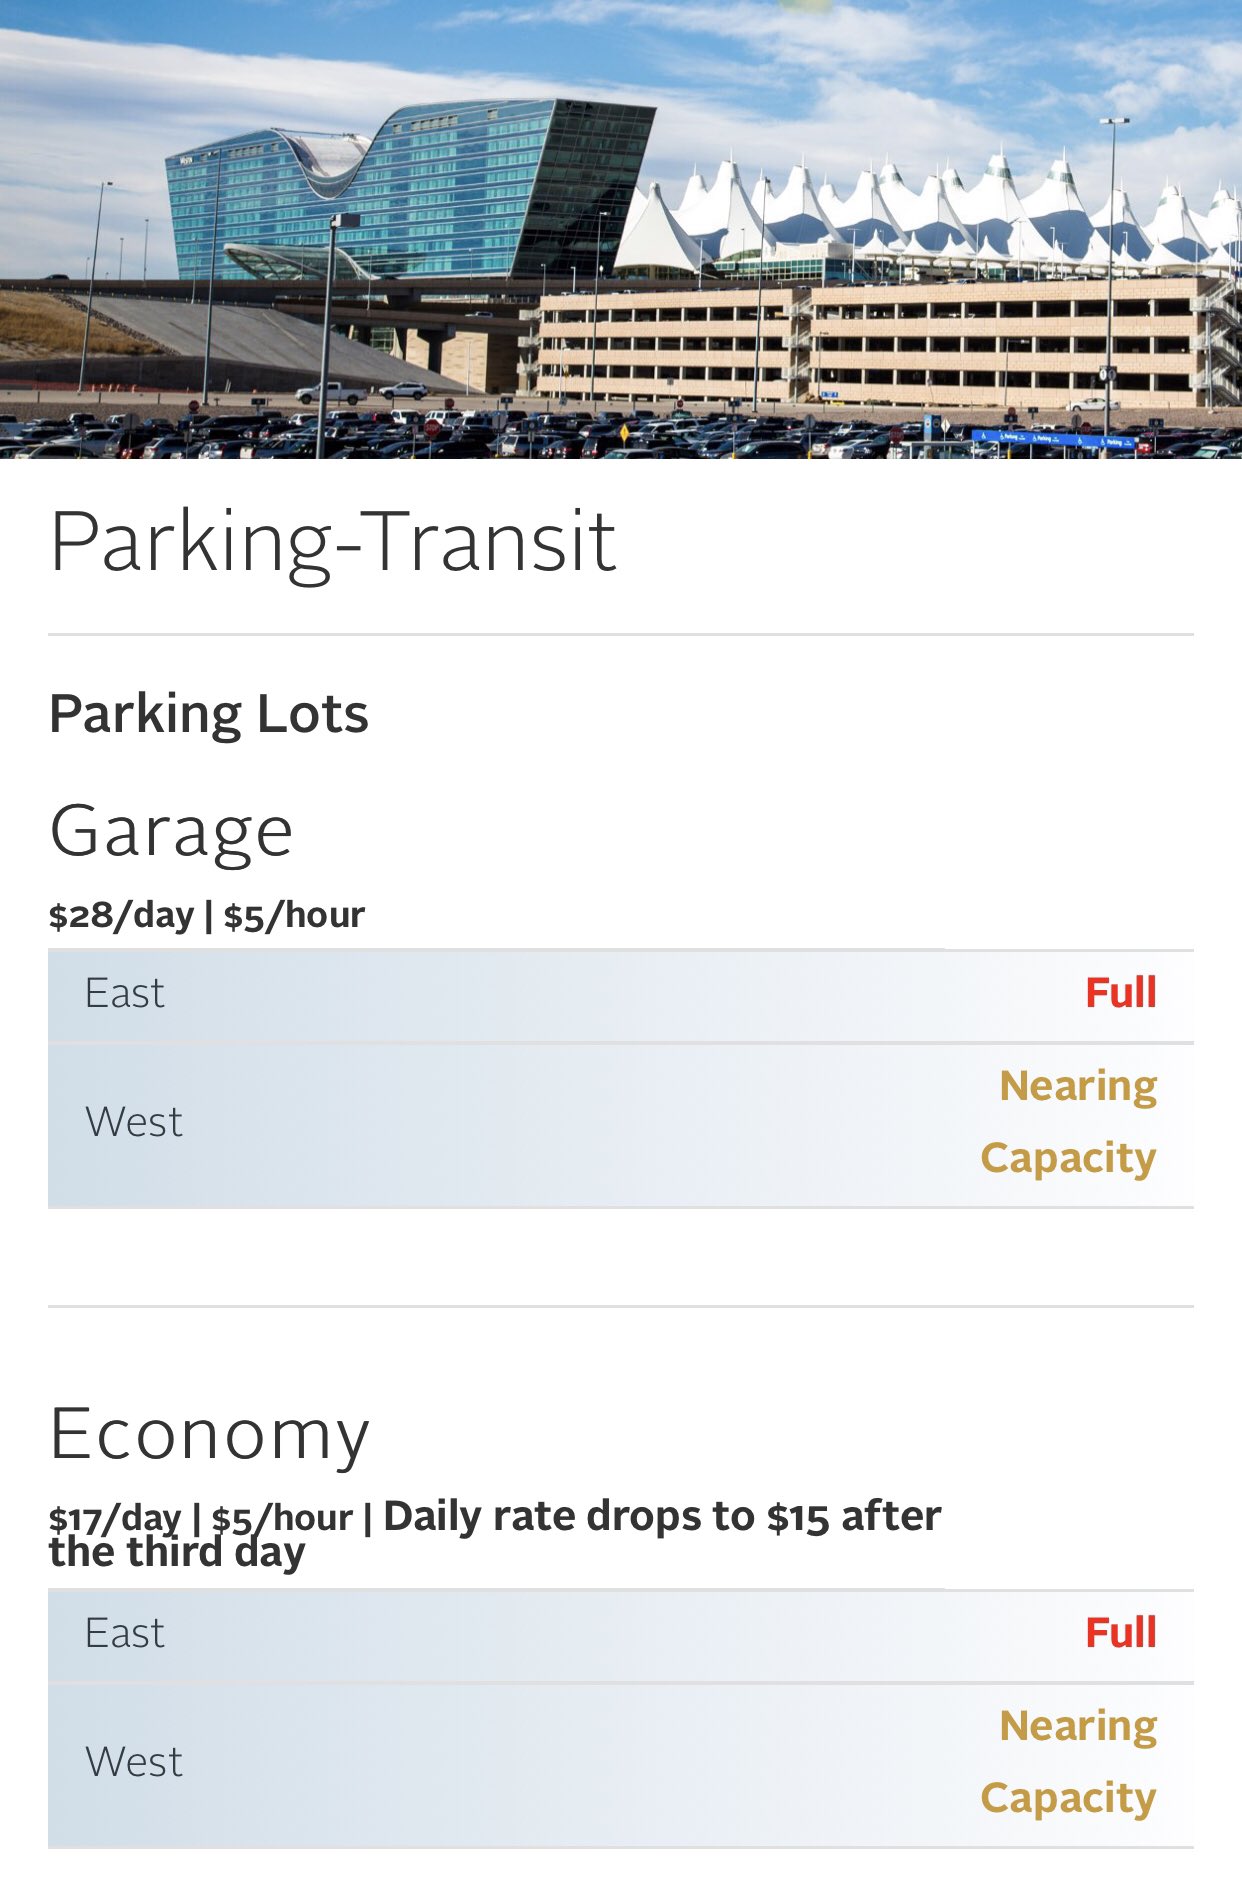 Lot 10 parking rate 2021